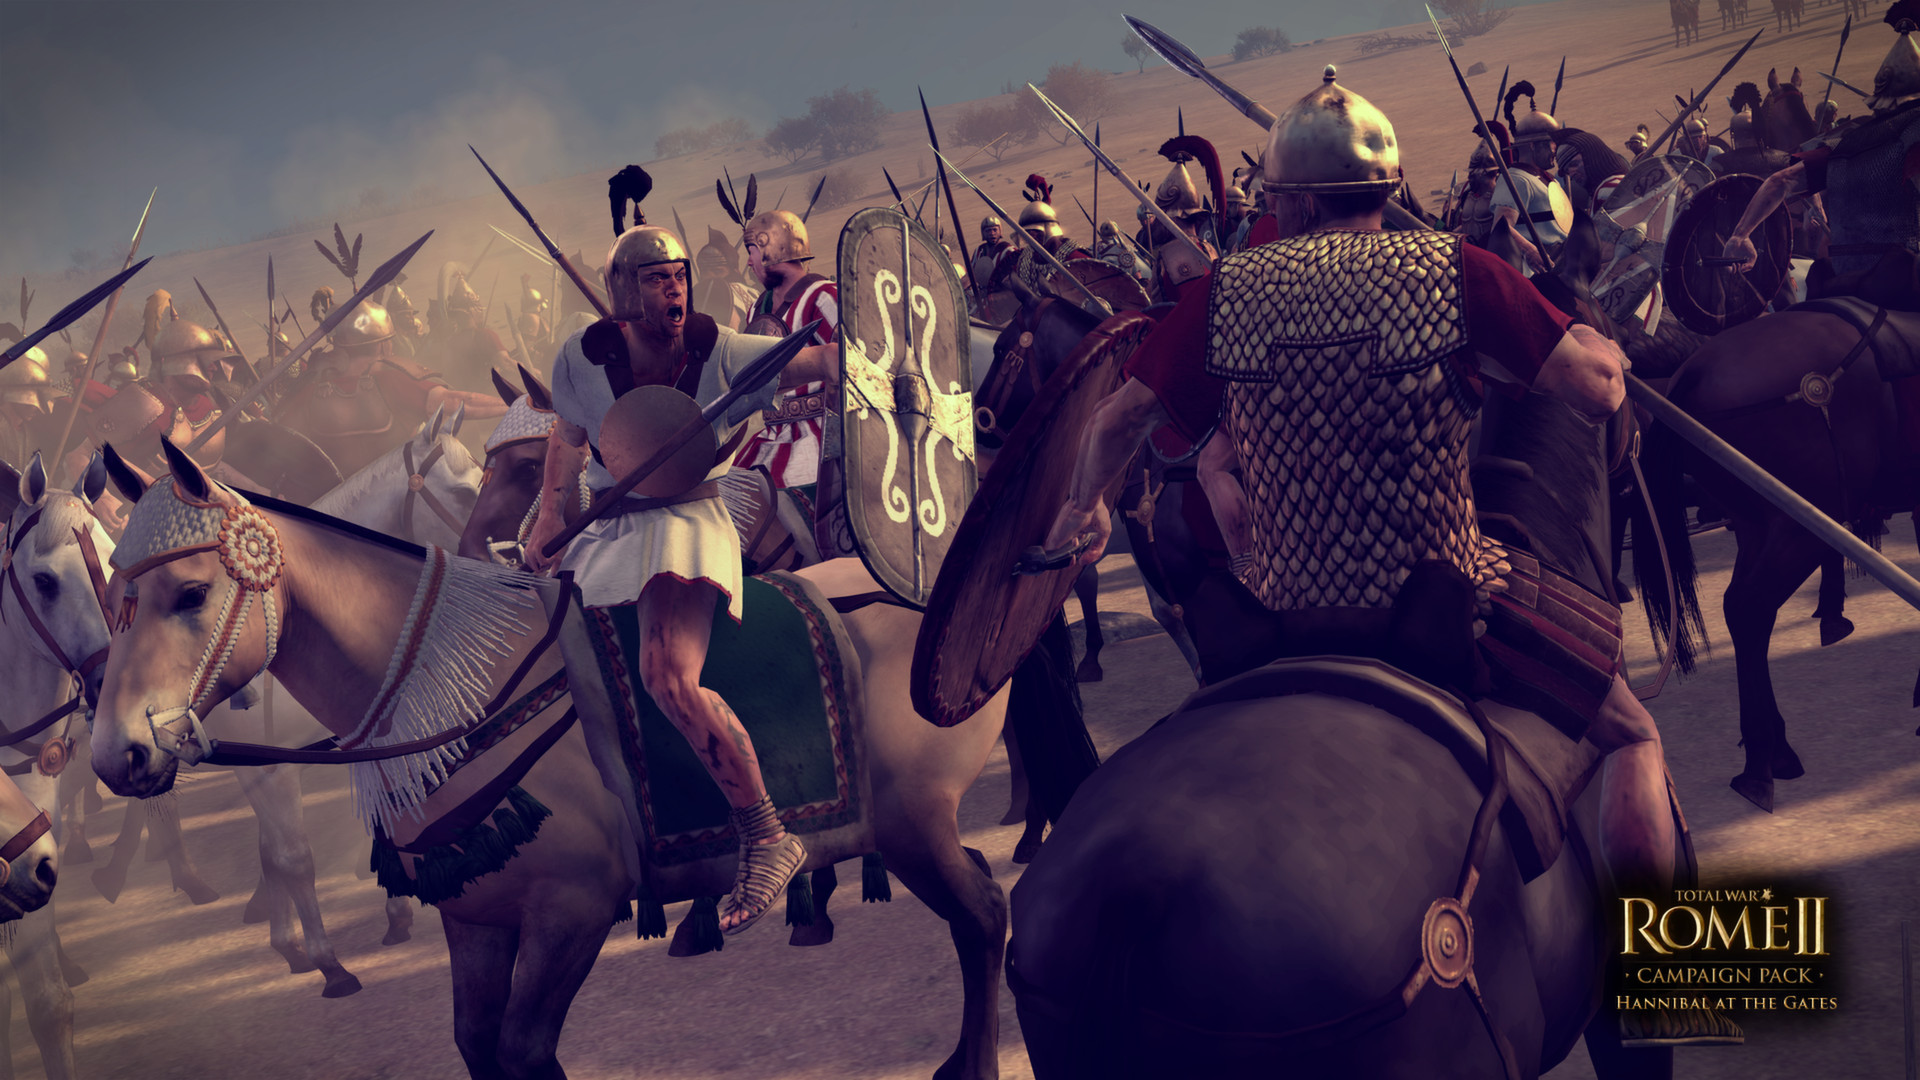 Total War: ROME II - Hannibal at the Gates Campaign Pack Featured Screenshot #1